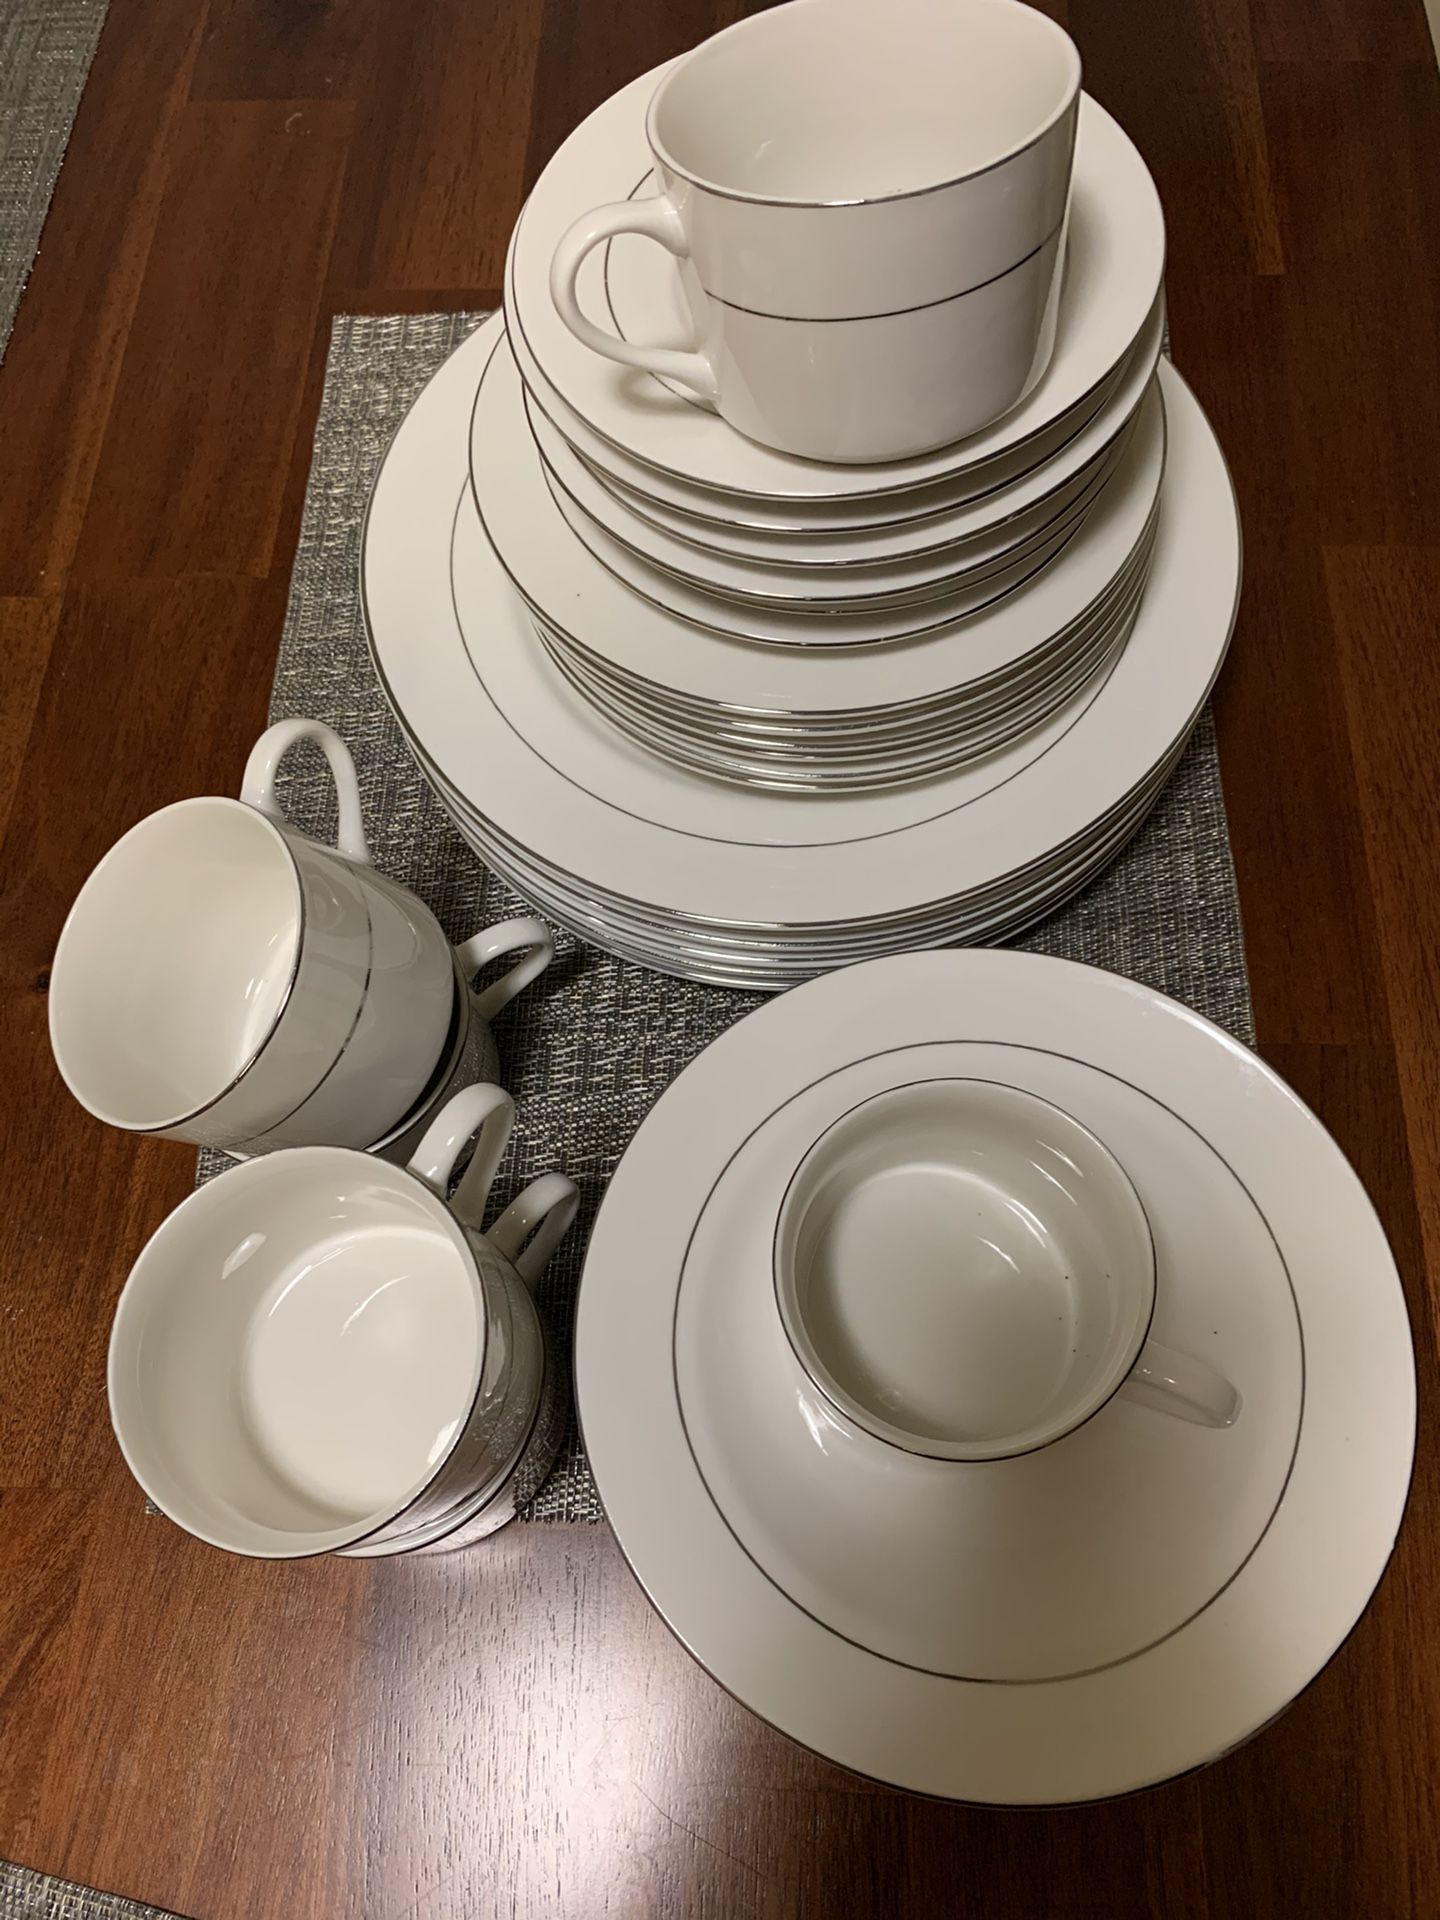 Casual china set for 6.